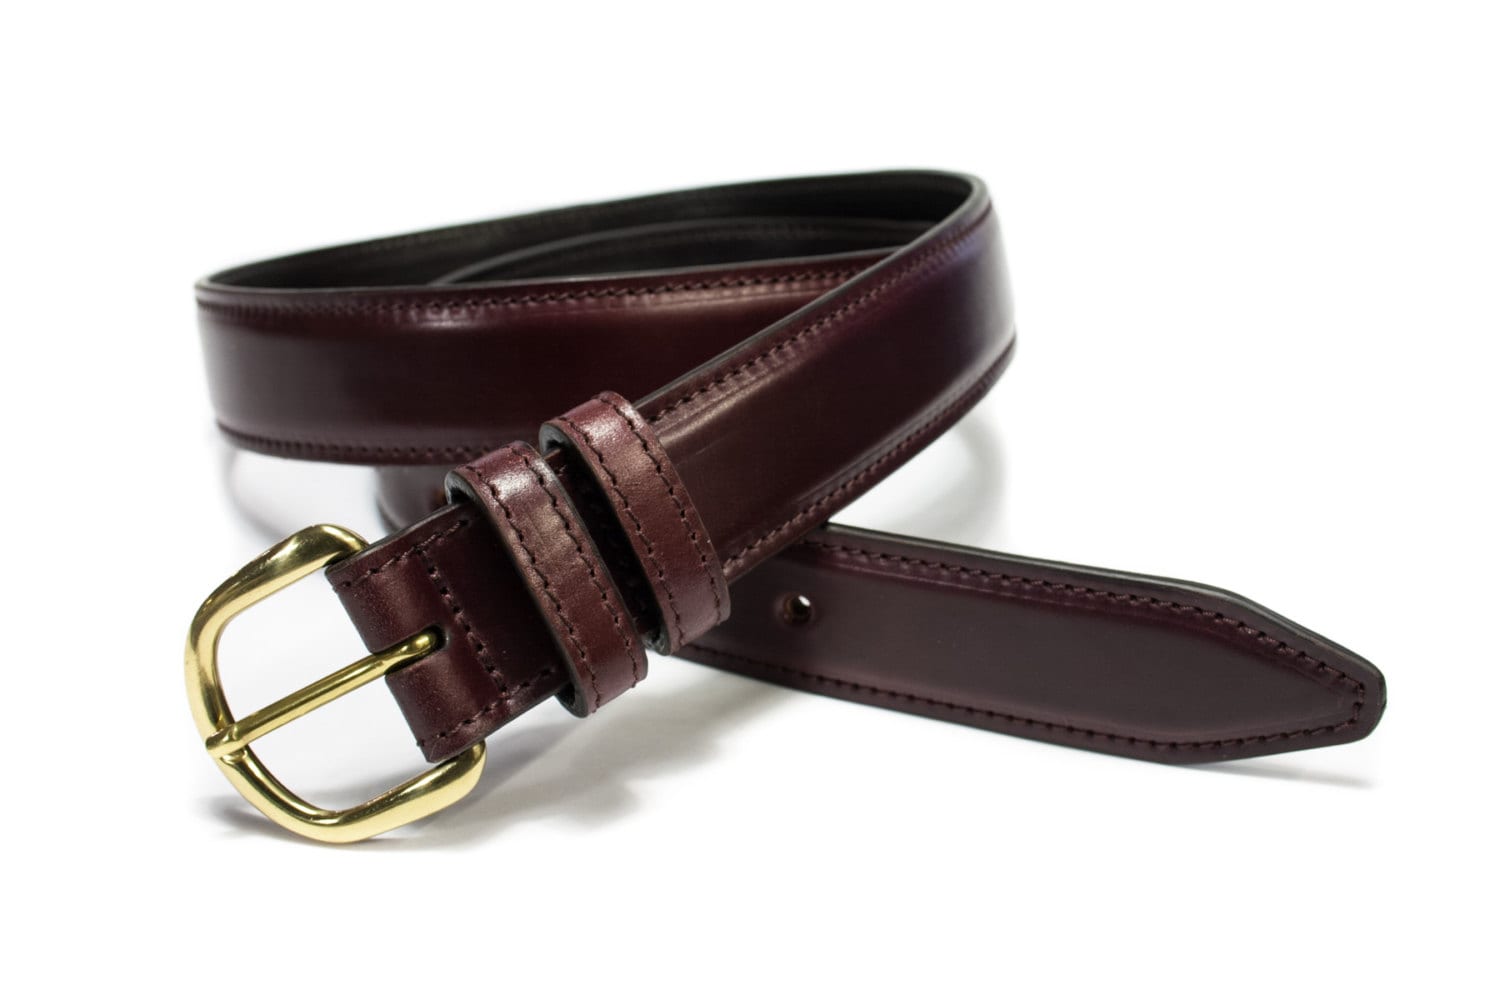 MENS REAL LEATHER 1.5 SNAP BELTS DETACHABLE MADE IN ENGLAND BY ZACK HUNTER 